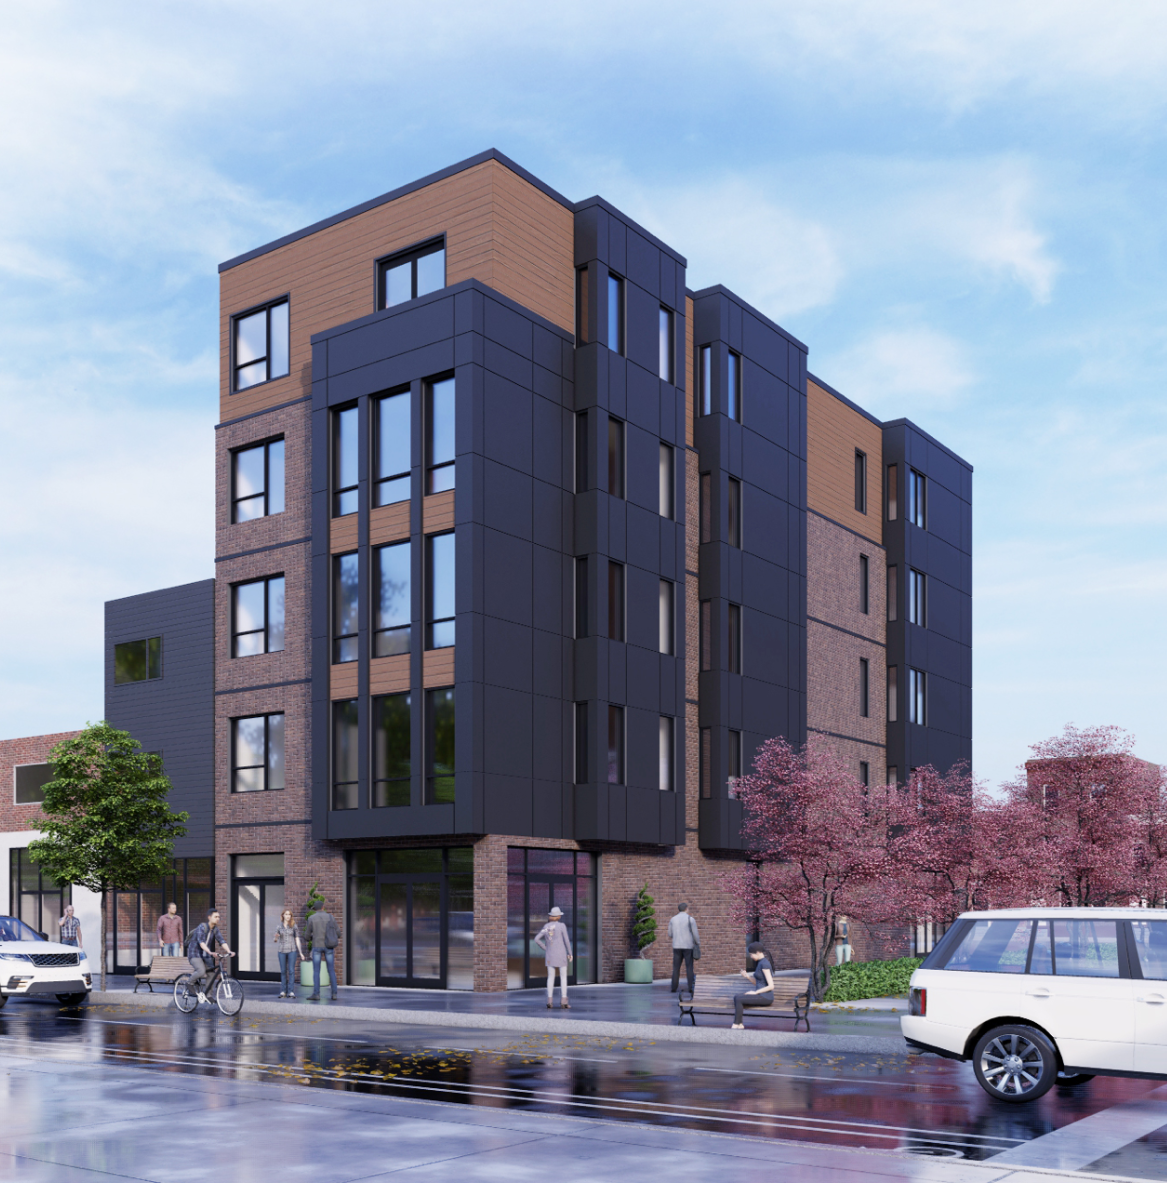 The Frankford Collective at 1144 Frankford Avenue. Rendering credit: Kore Design Architecture